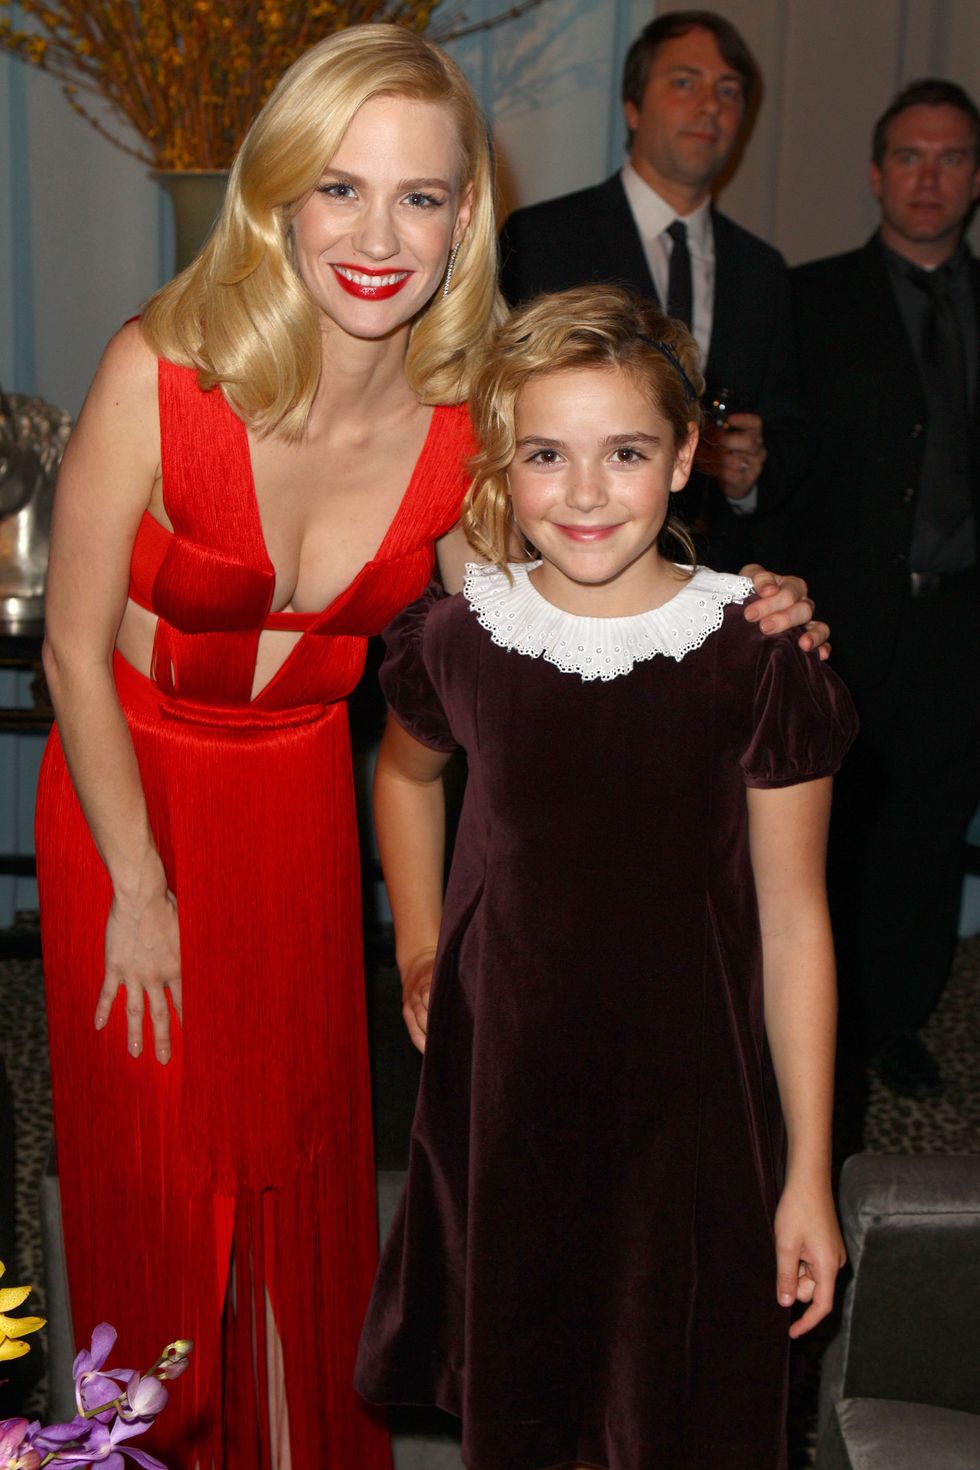 actors january jones and kiernan shipka attend amcs 2011 golden globe awards viewing and after party held at the beverly hilton hotel on january 16, 2011 in los angeles, california